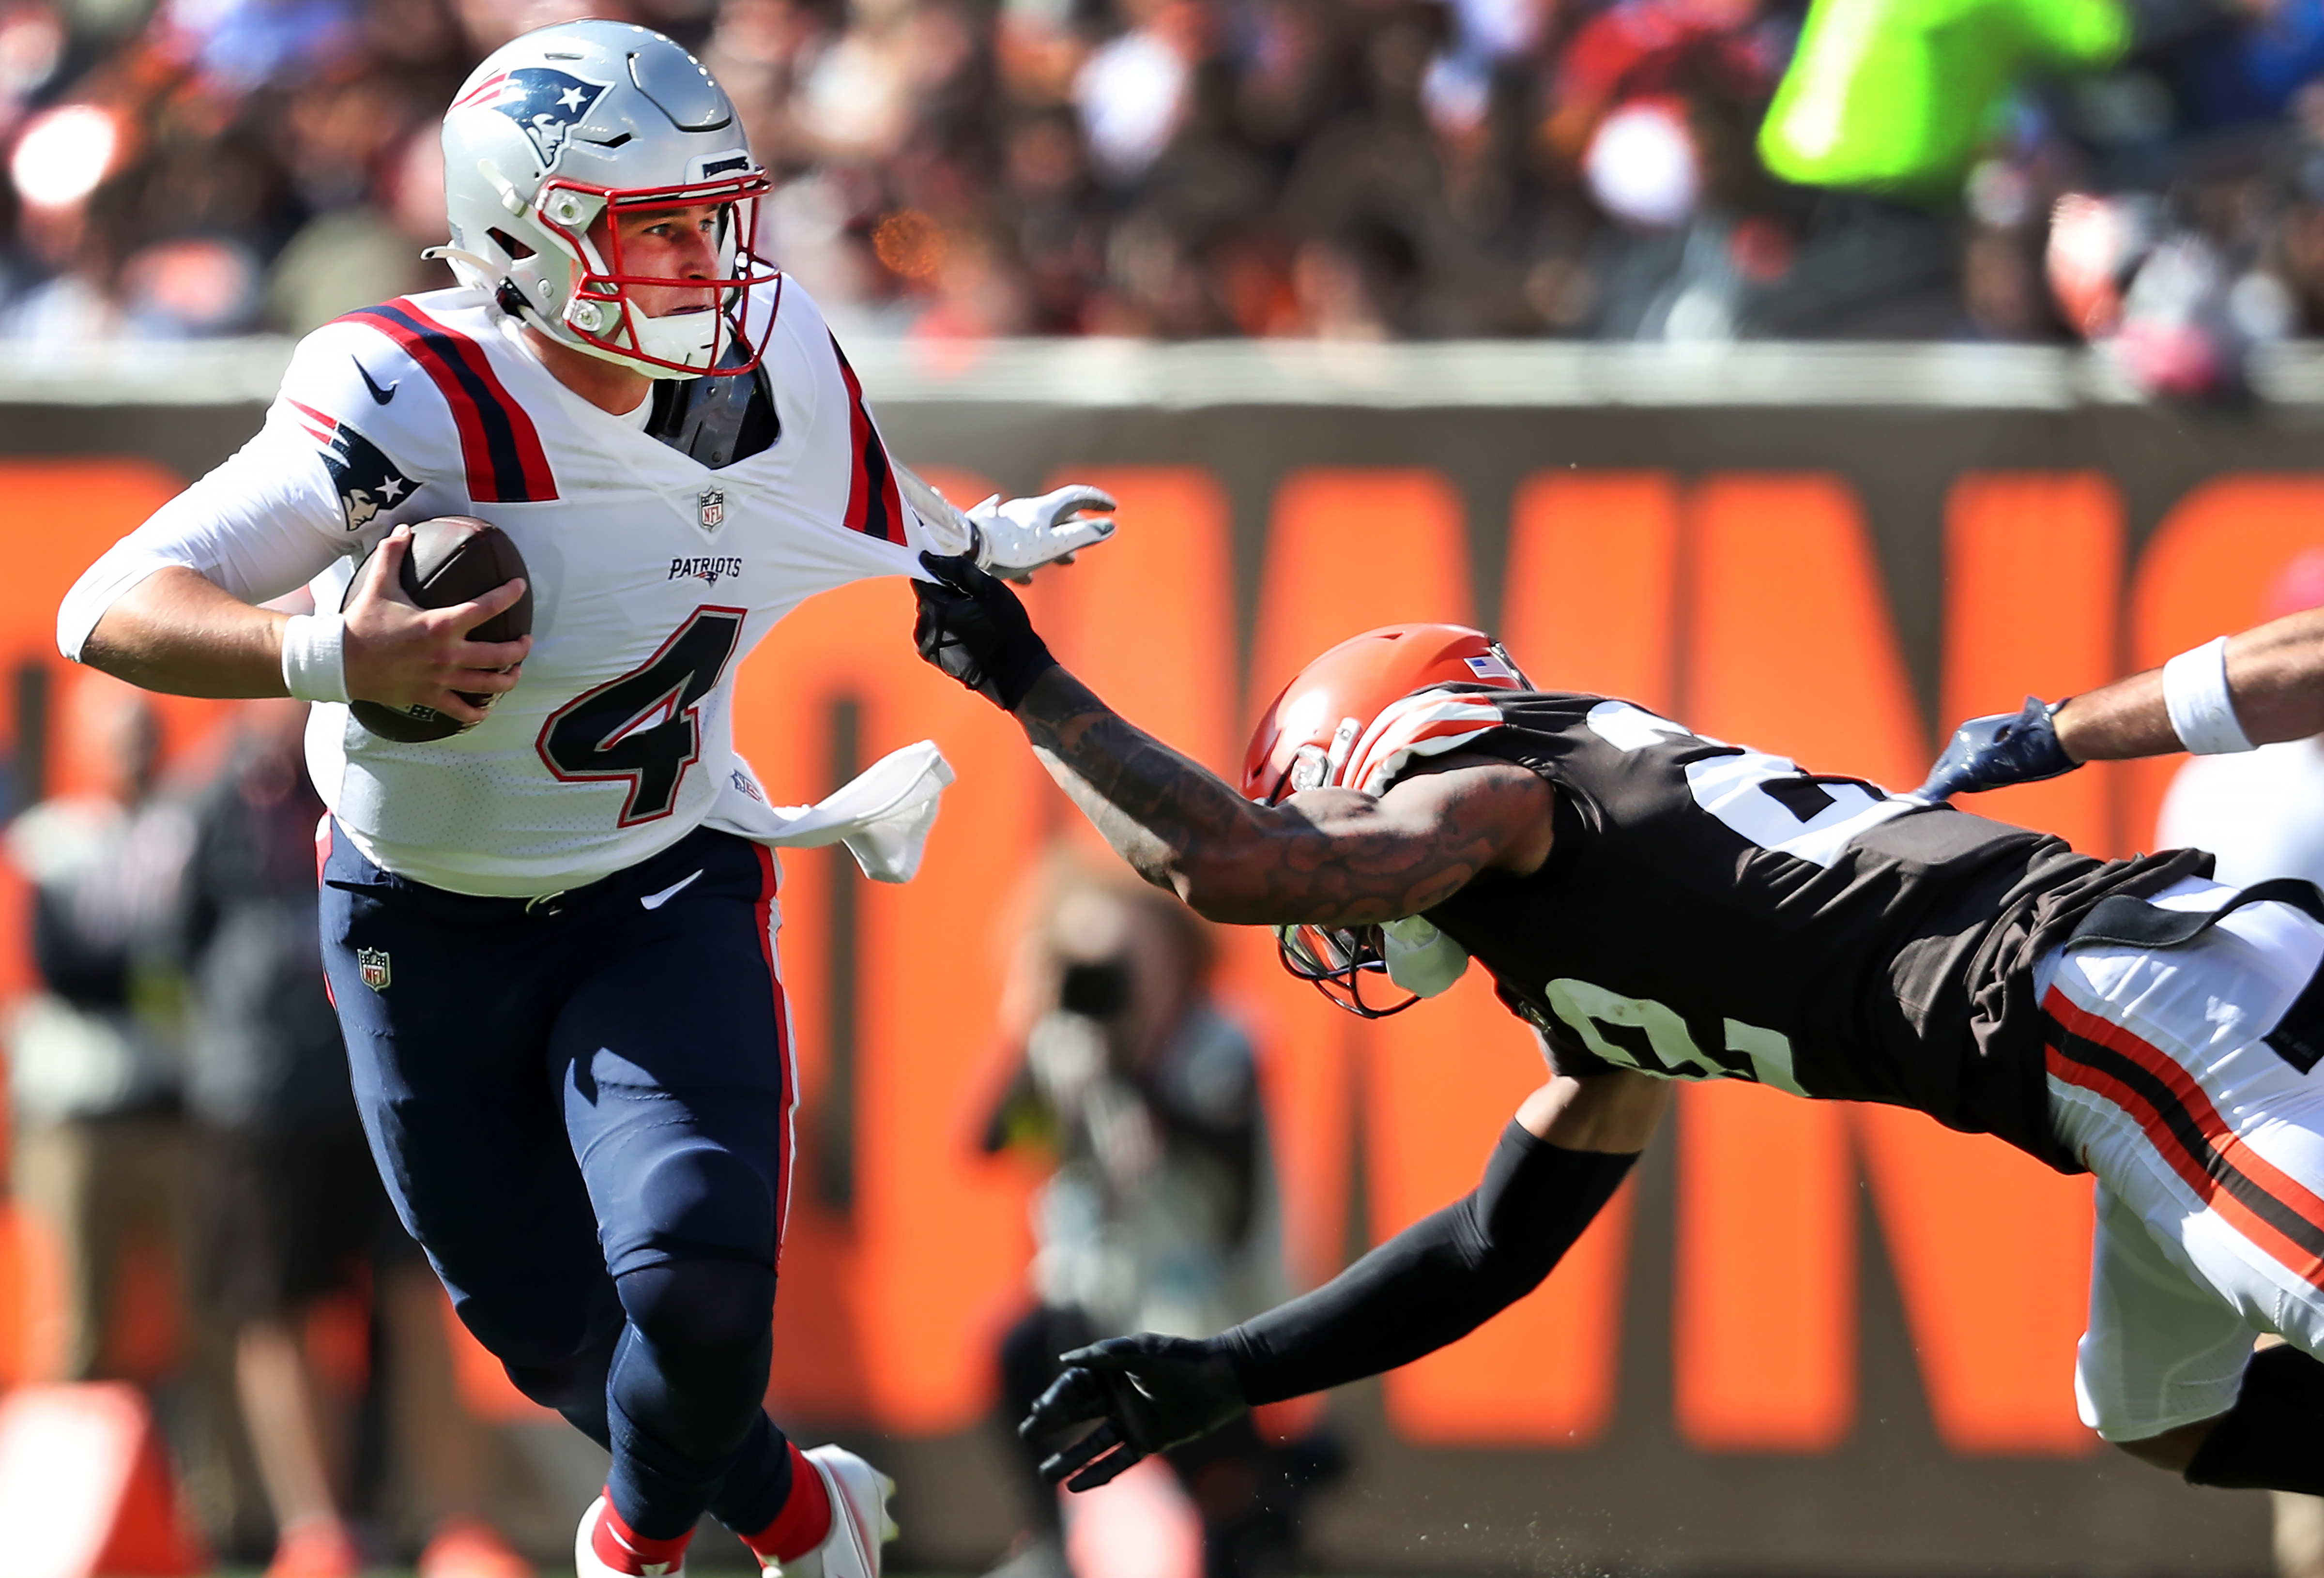 Get ready for another week of debating Bailey Zappe vs. Mac Jones after  Patriots rout Browns - The Boston Globe